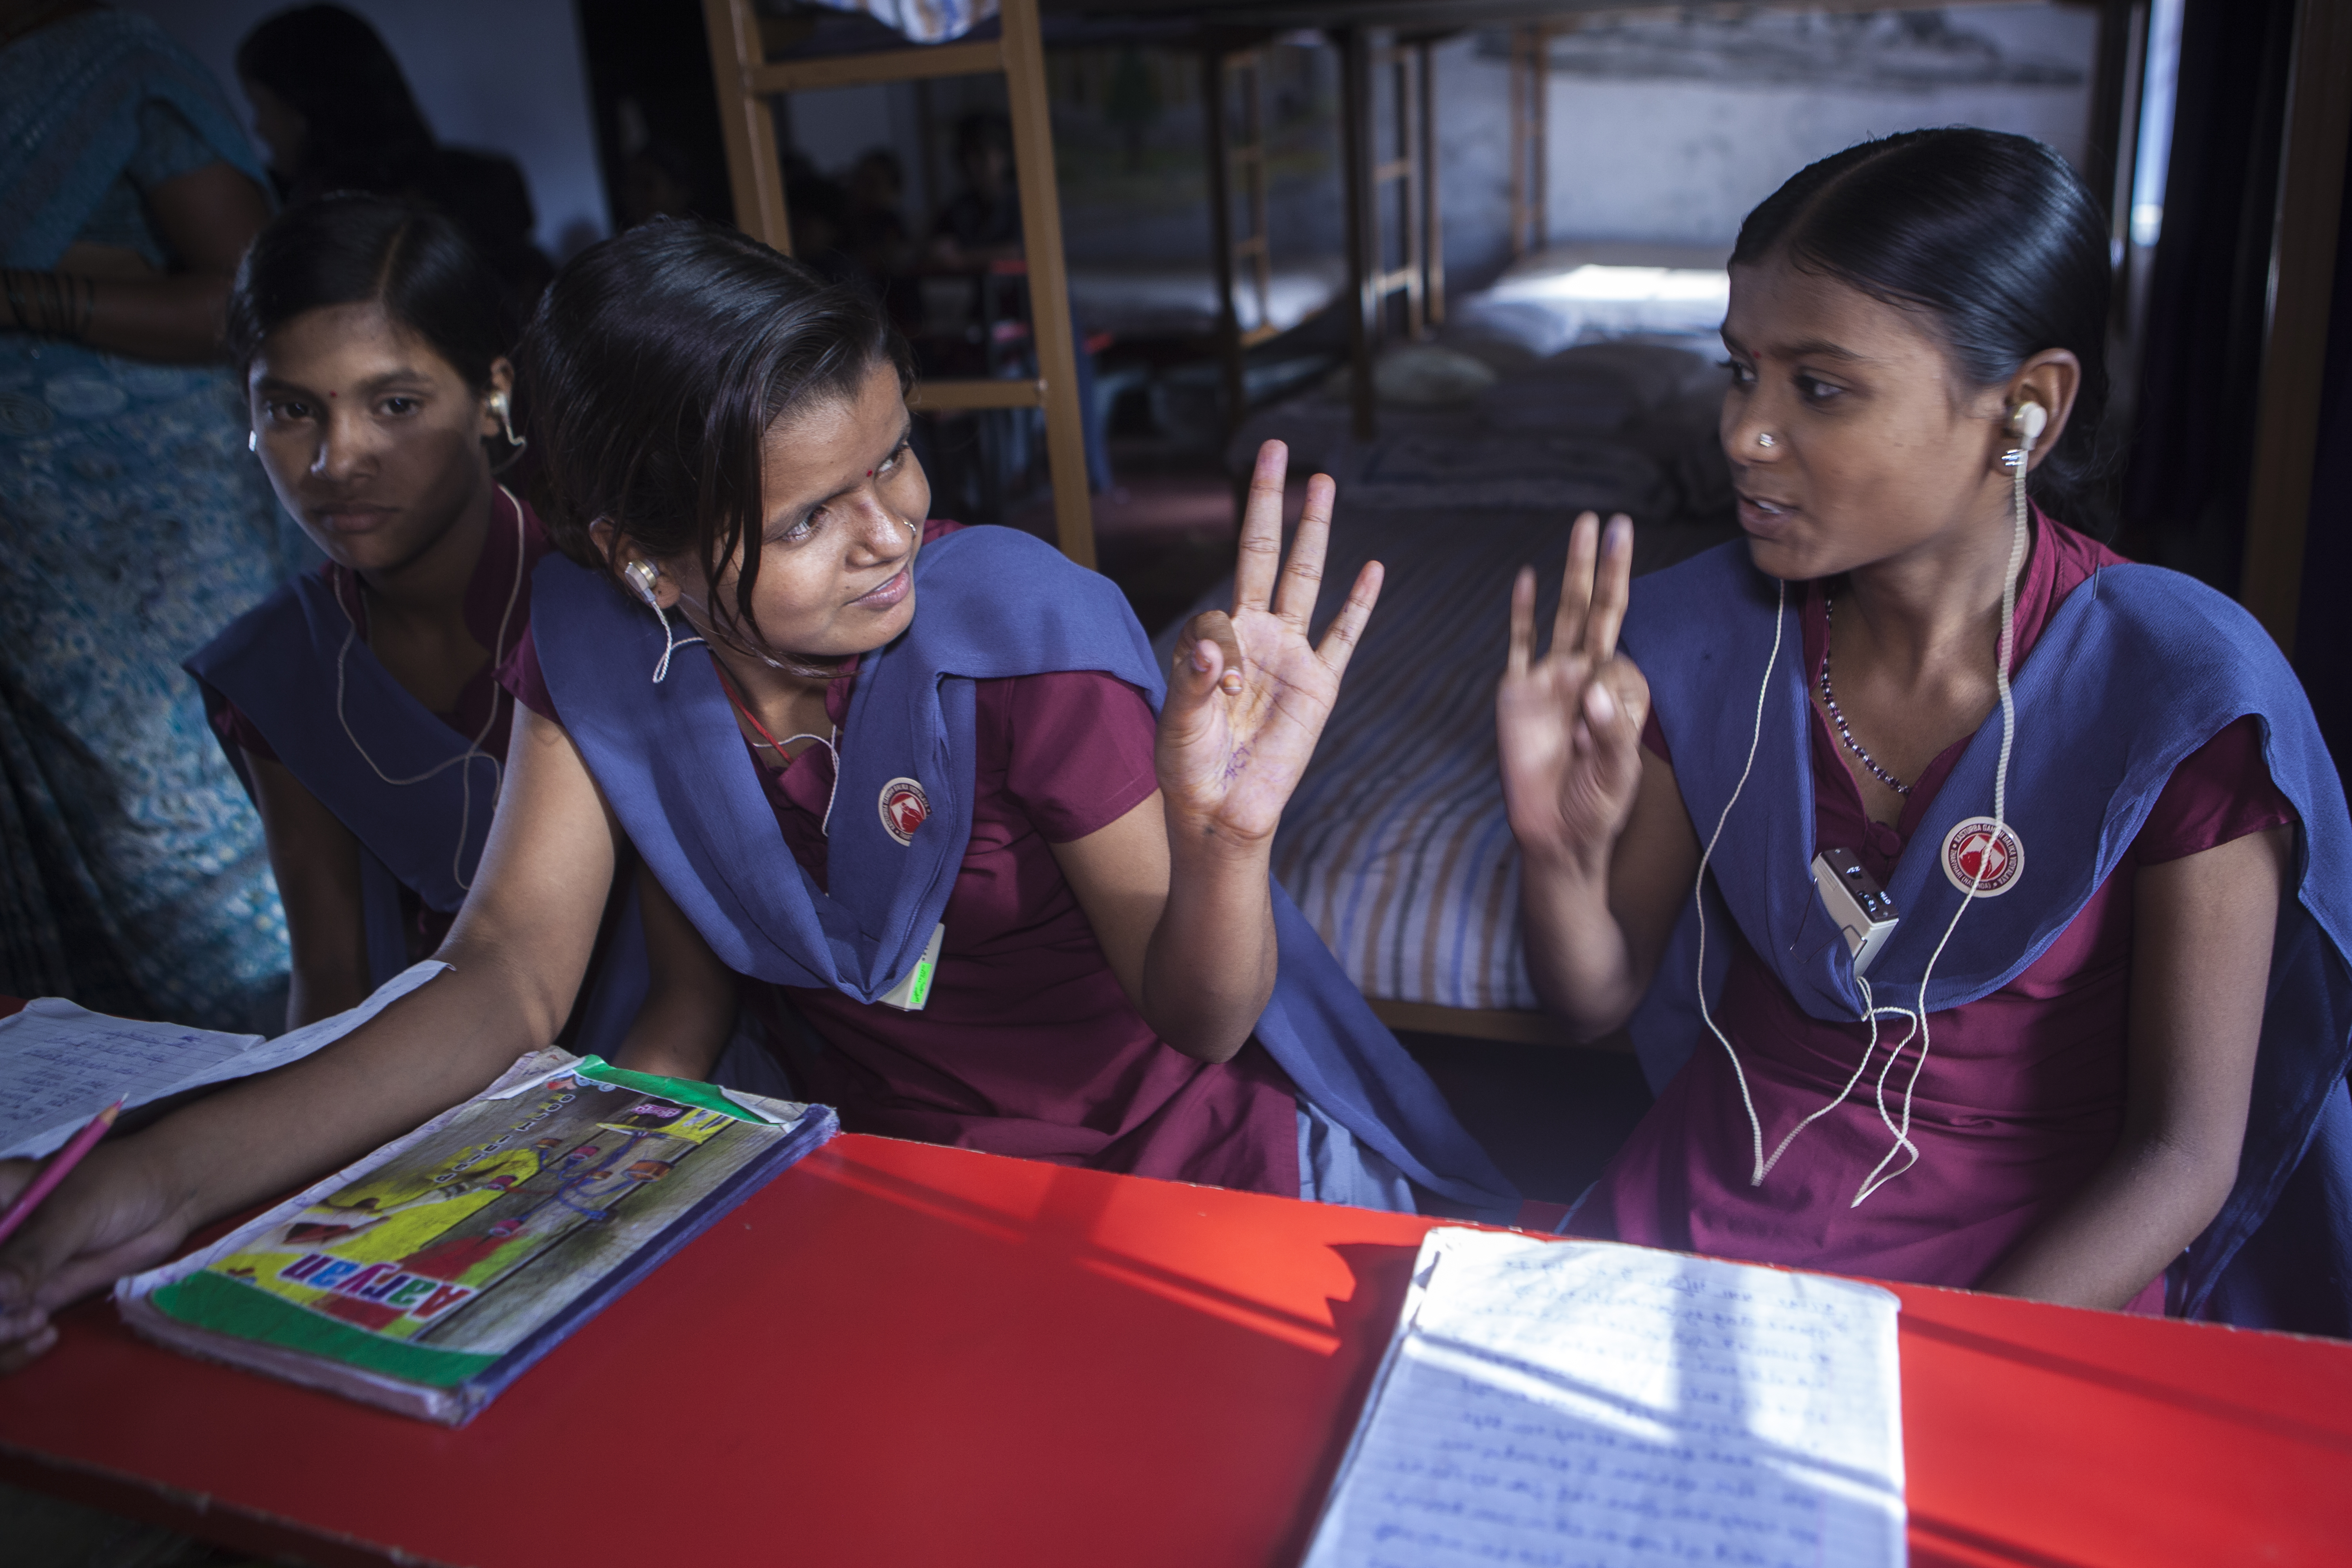 Sulekha (R), and Pratima (M) (hearing impaired) communicate during a class at a bridge school in ,KGBV ( Tharthari), May 17, 2013.